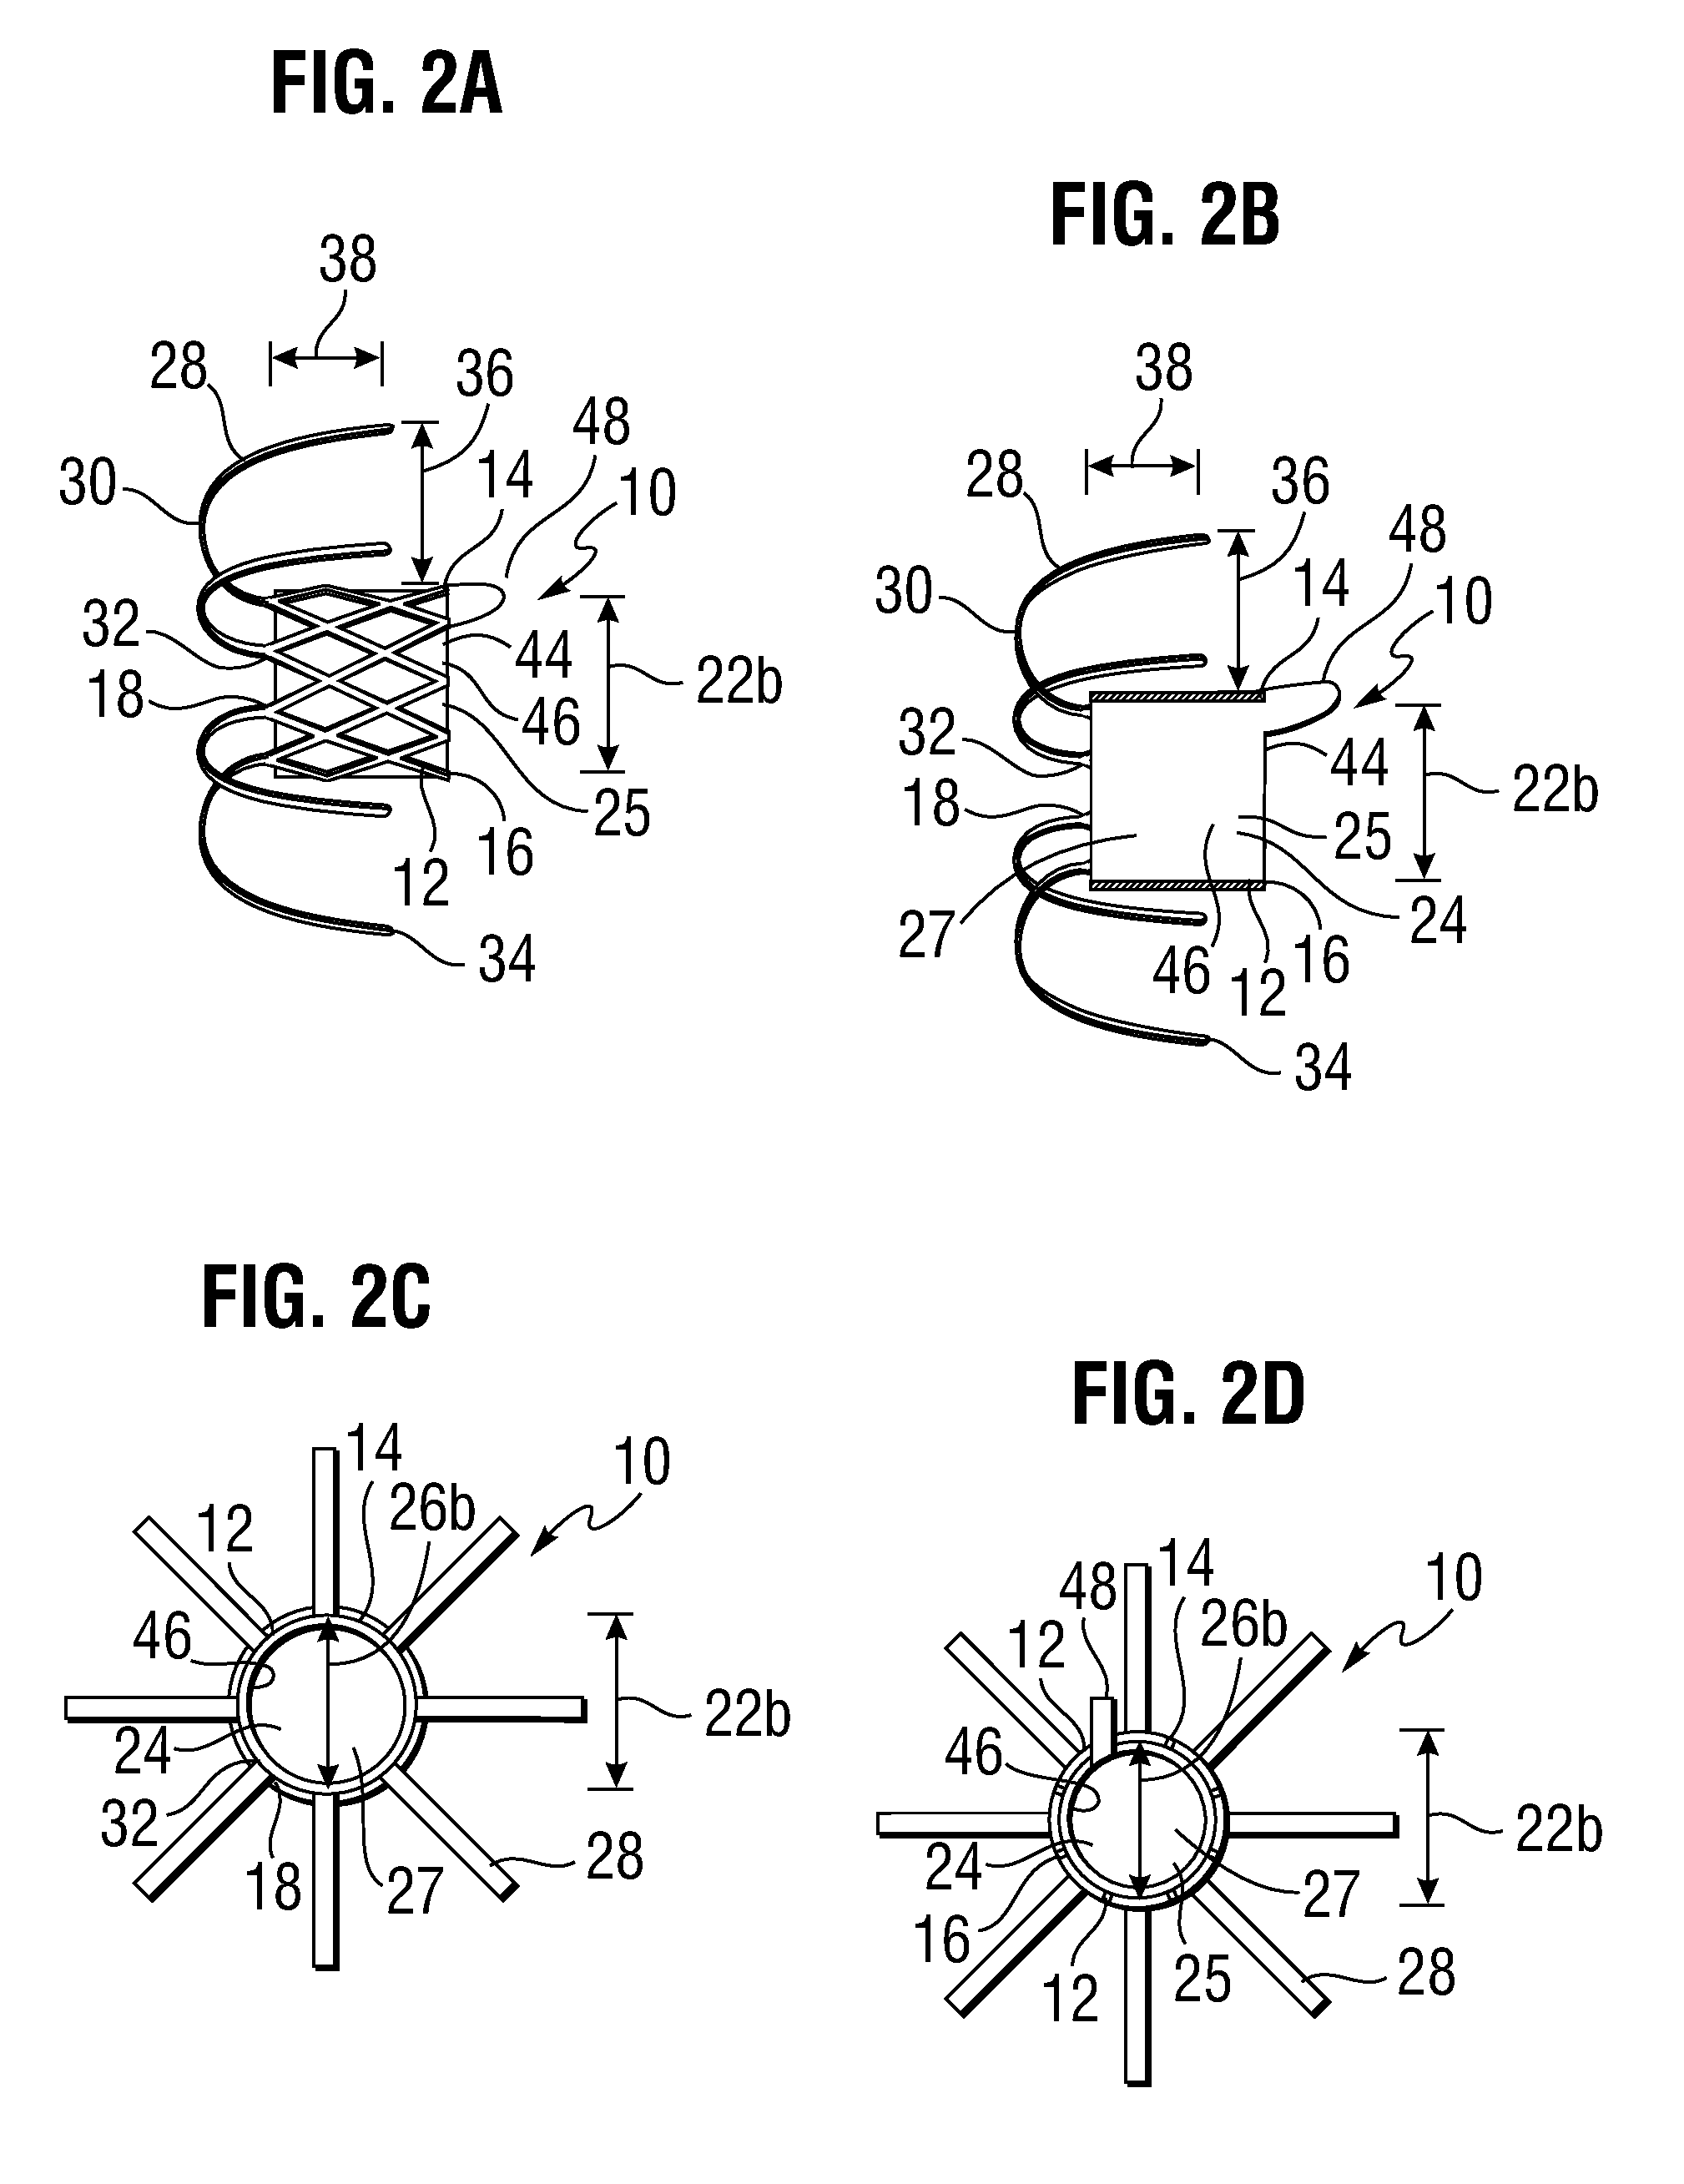 Apical puncture access and closure system